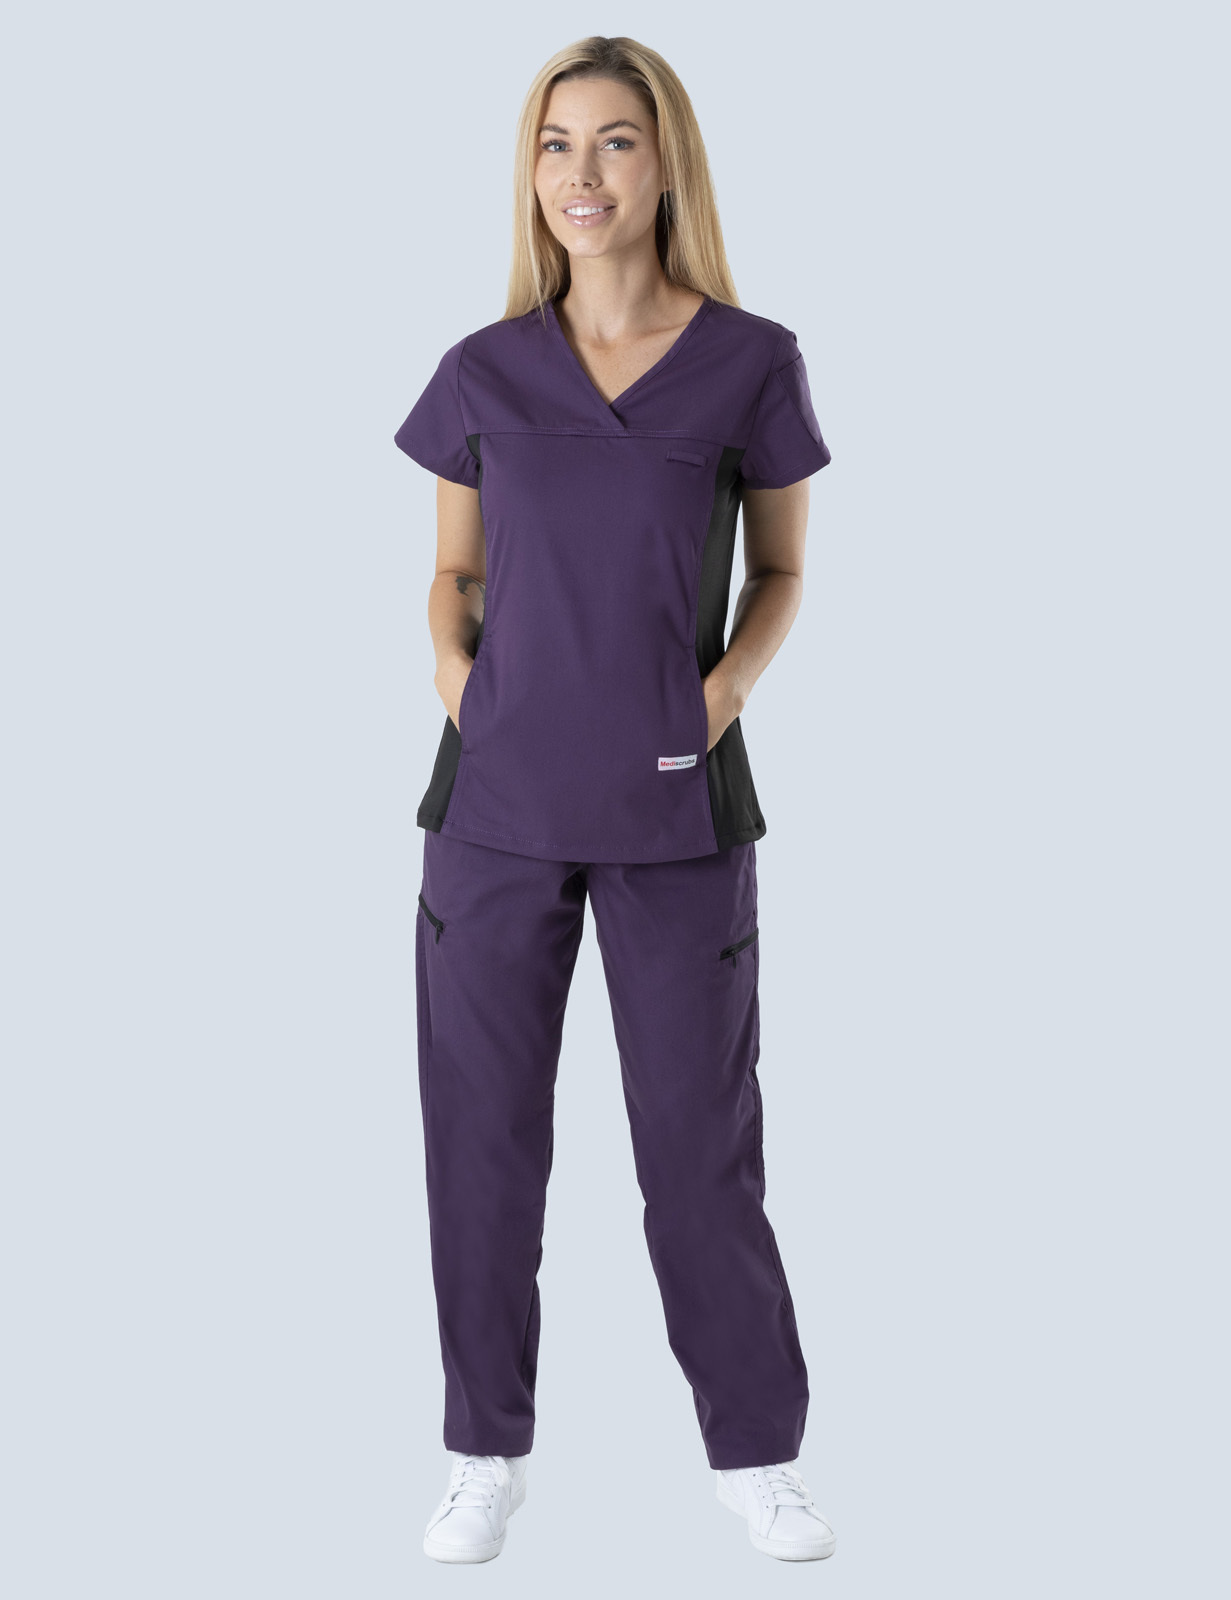 RBWH - Grantley Stable Neonatal Unit (Women's Fit Spandex Scrub Top and Cargo Pants in Aubergine incl Logos)